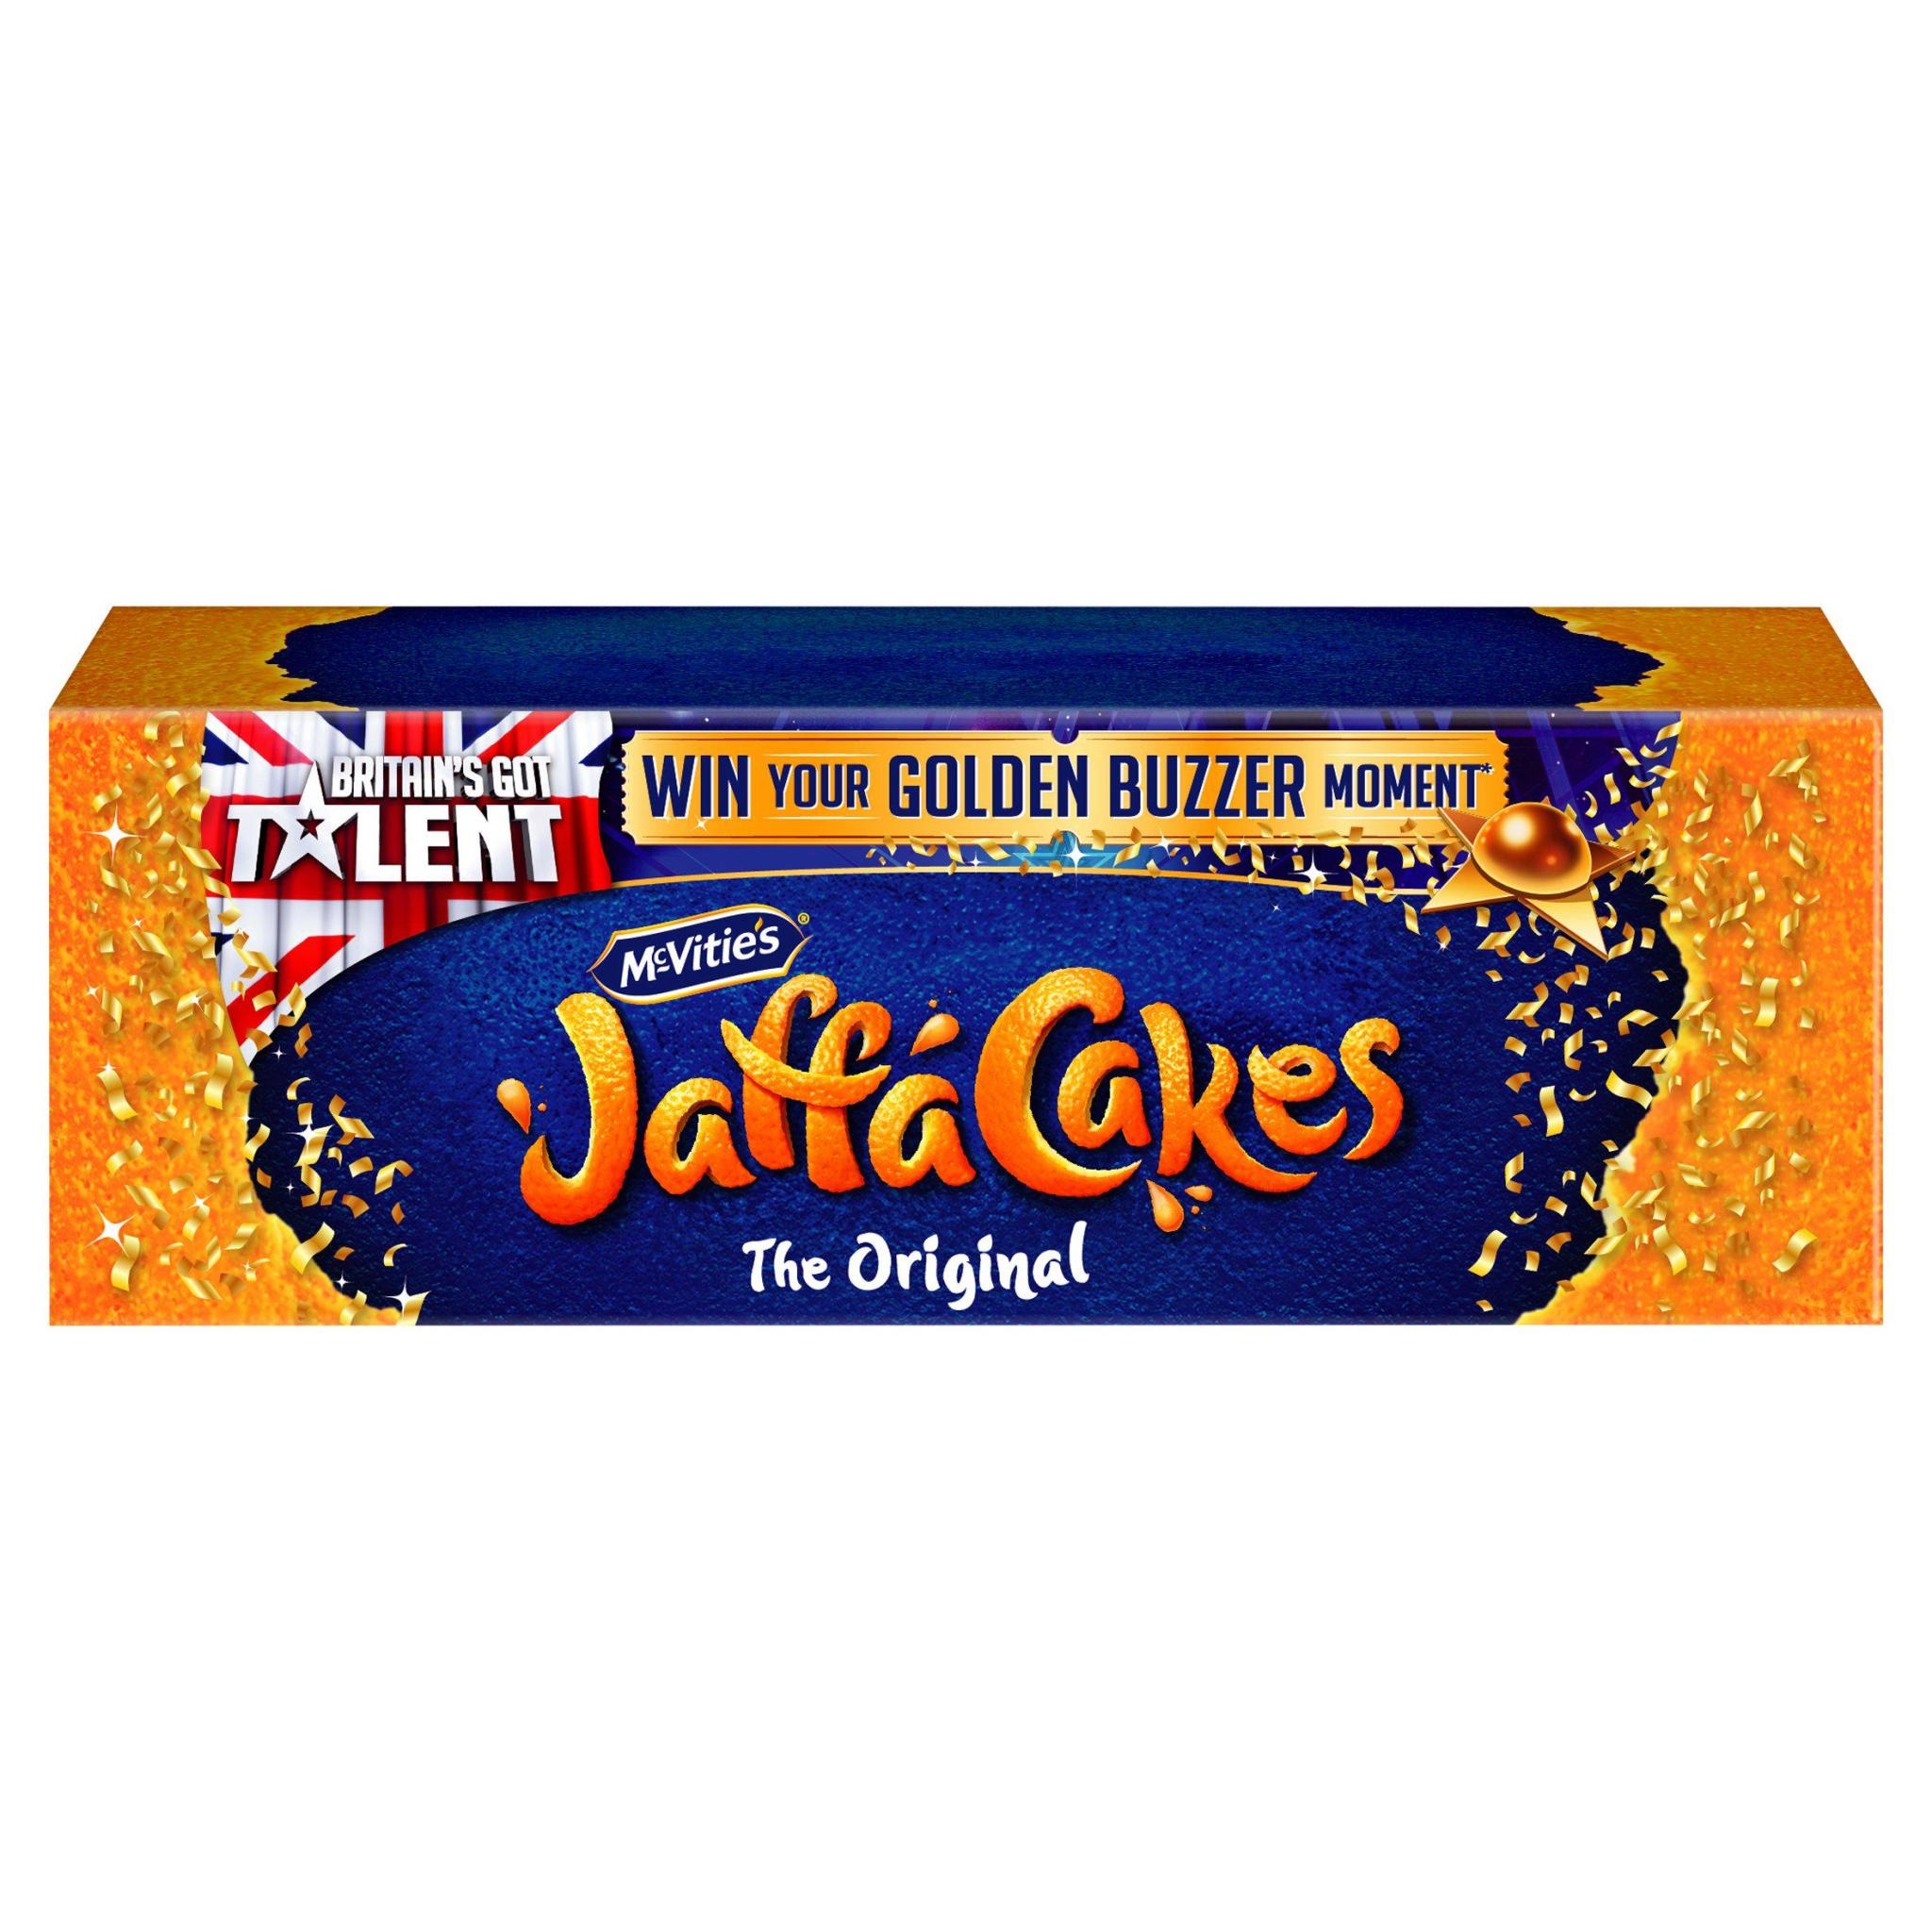 Jaffa Cakes: cake or biscuit? Glasgow continues debate | Glasgow Times